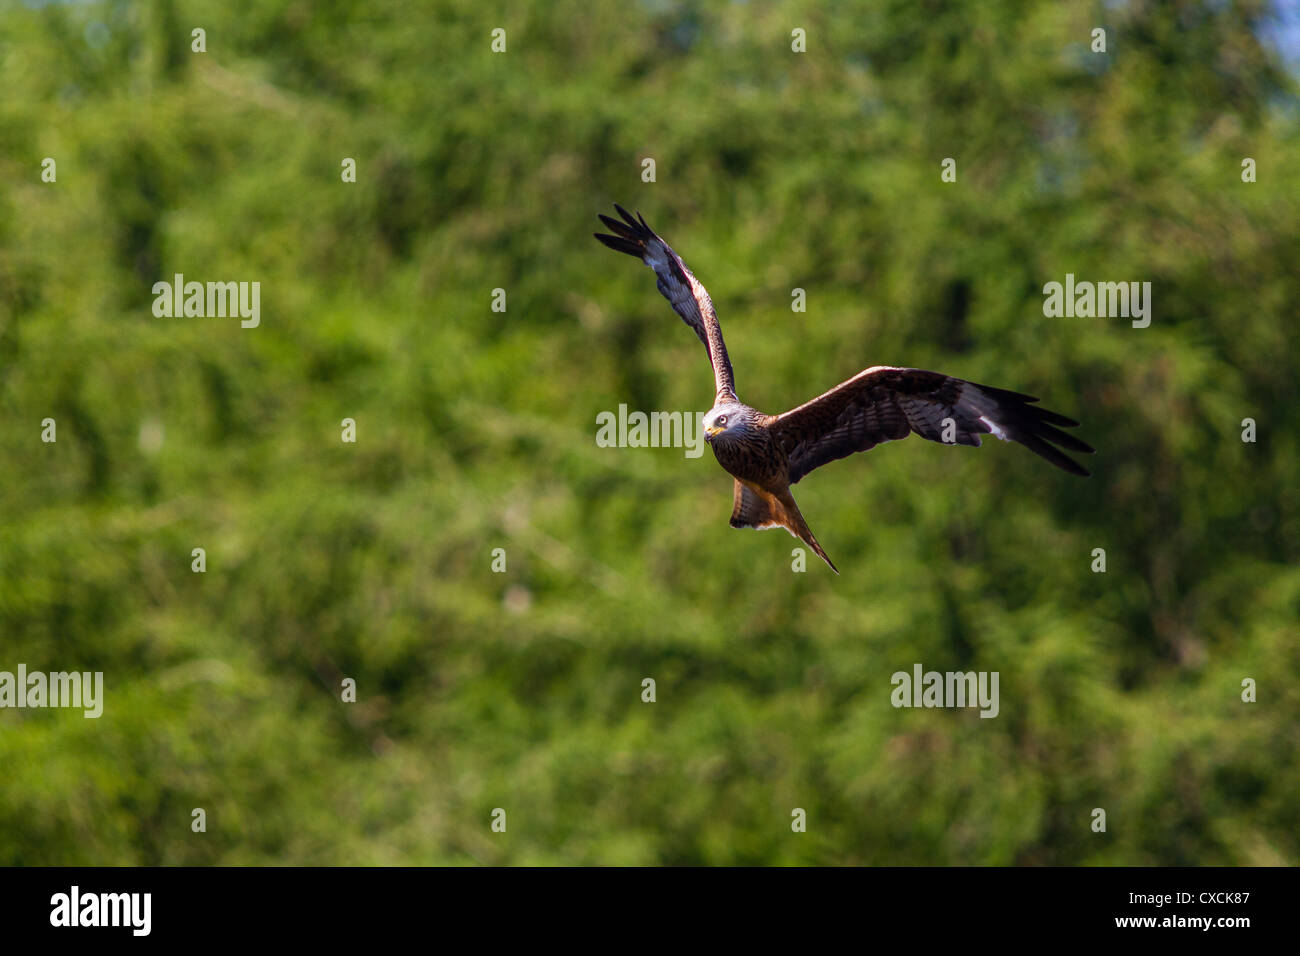 Red Kite at Nant yr Arian in Ceredigion, Wales Stock Photo